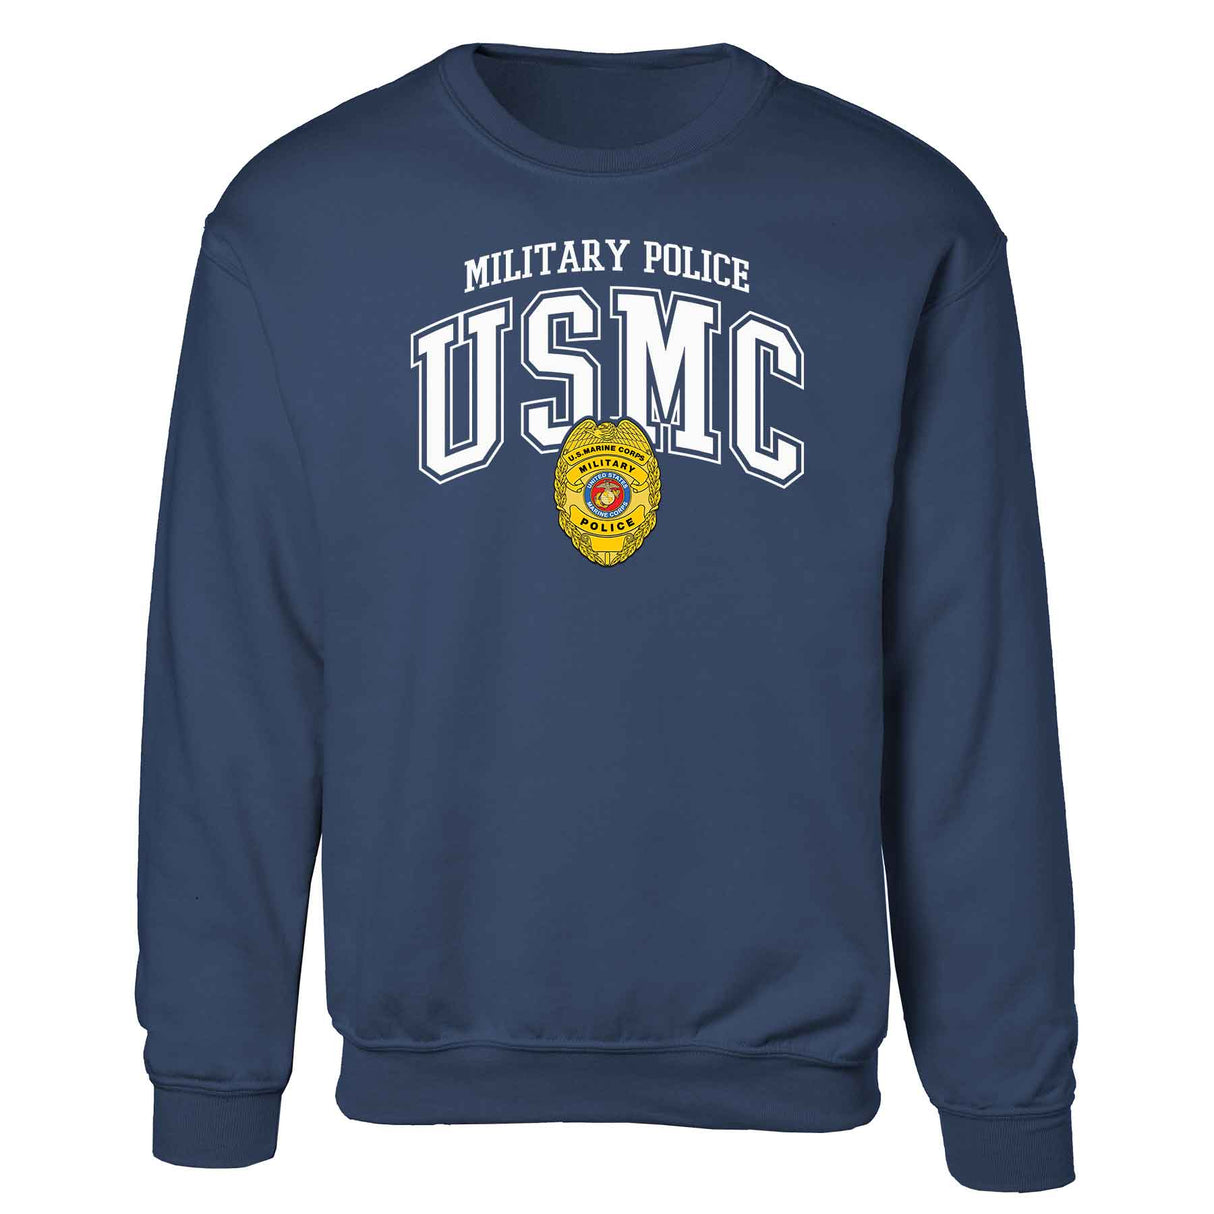 Military Police Badge Arched Sweatshirt - SGT GRIT